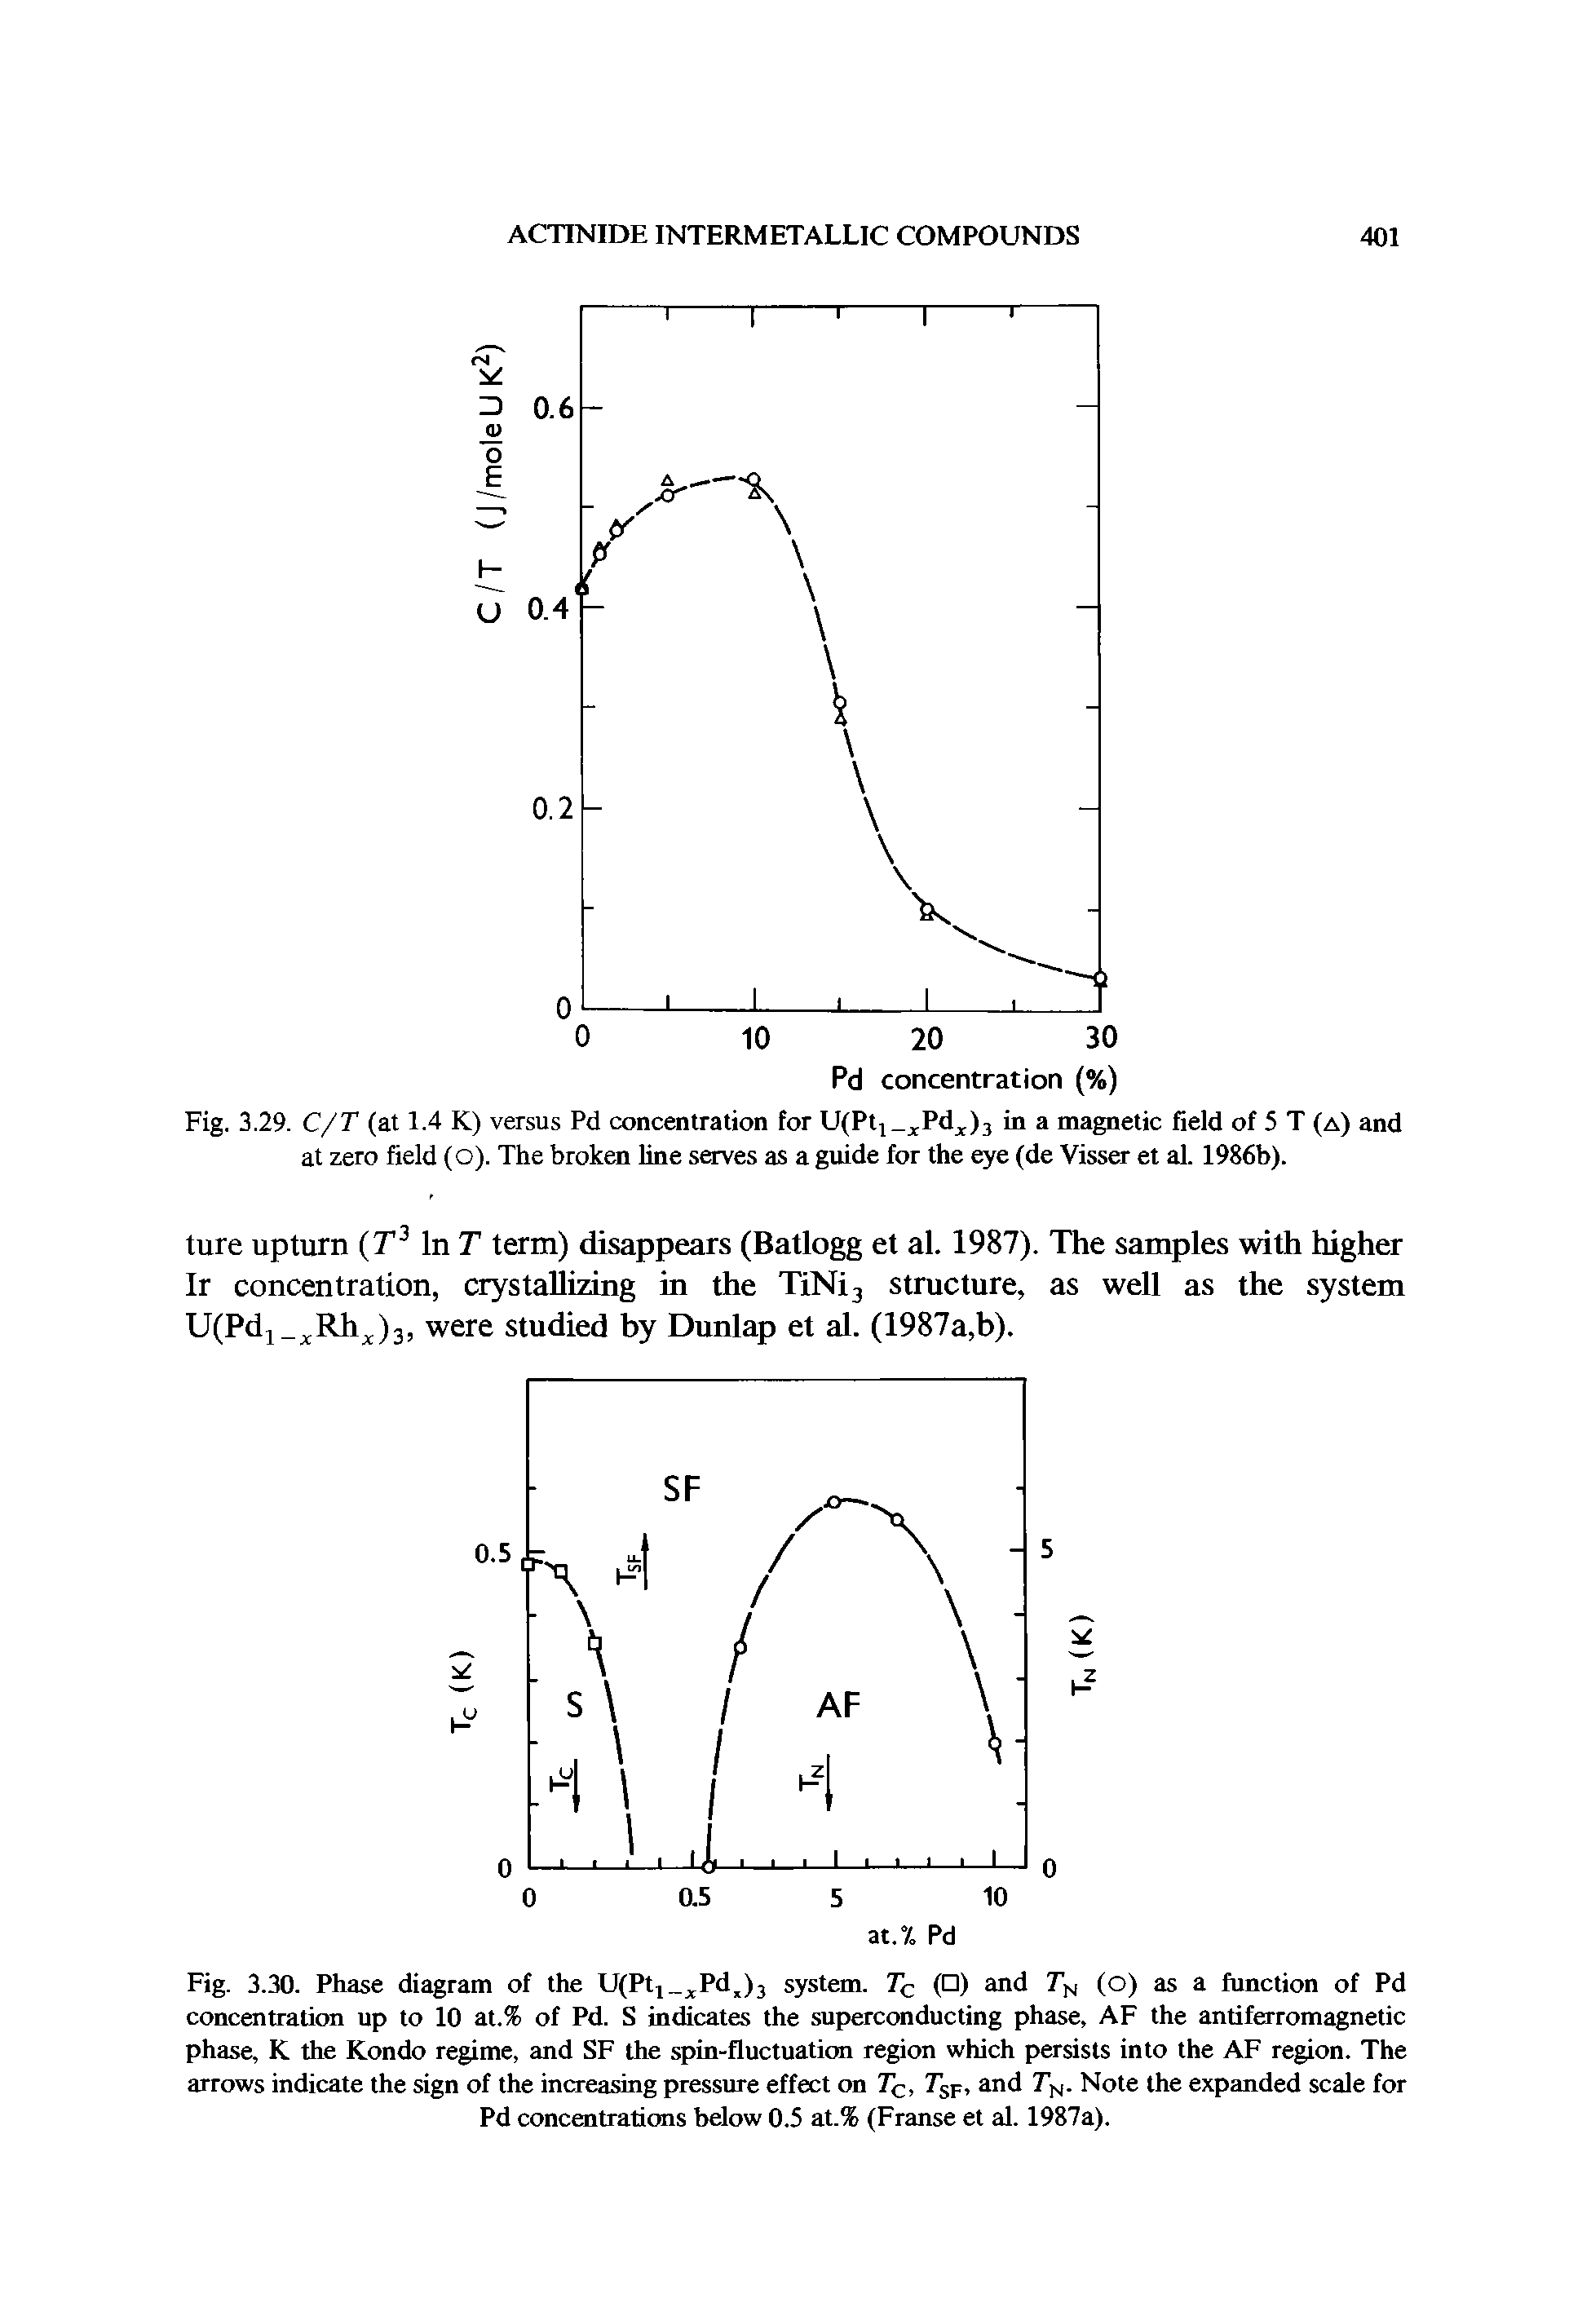 Fig. 3.30. Phase diagram of the U(Pt1 Pd l)3 system. Tc ( ) and TN (o) as a function of Pd concentration up to 10 at.% of Pd. S indicates the superconducting phase, AF the antiferromagnetic phase, K the Kondo regime, and SF the spin-fluctuation region which persists into the AF region. The arrows indicate the sign of the increasing pressure effect on C> 7sF> and 7V Note the expanded scale for Pd concentrations below 0.5 at.% (Franse et al. 1987a).